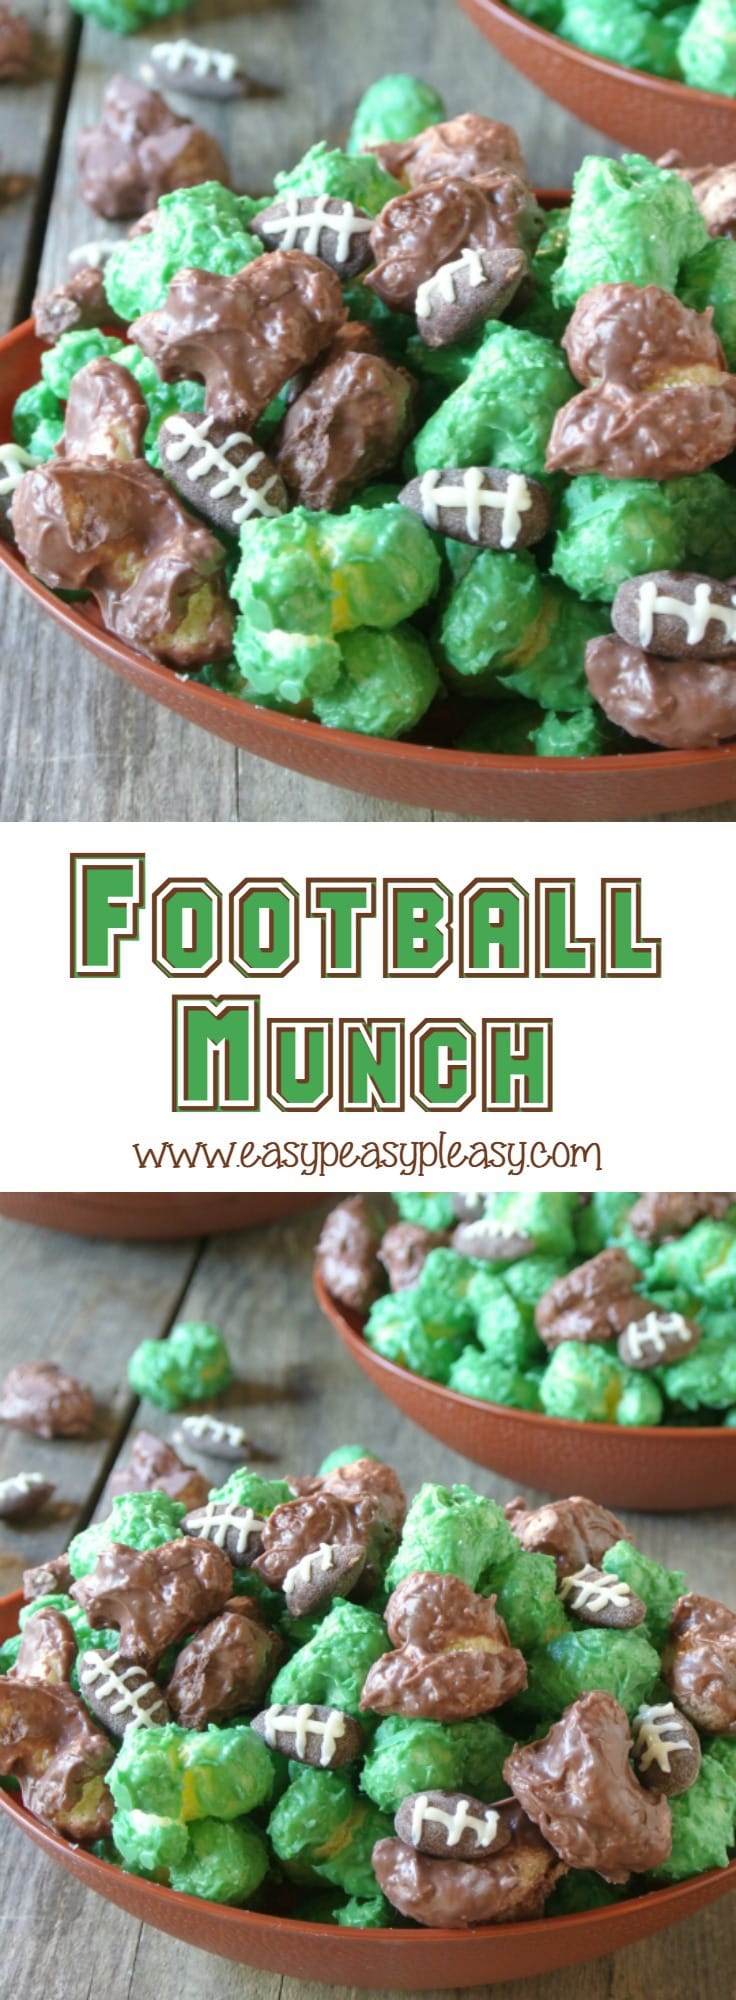 easy-3-ingredient-football-munch-will-have-you-scoring-the-winning-touchdown-no-popcorn-here-come-check-it-out